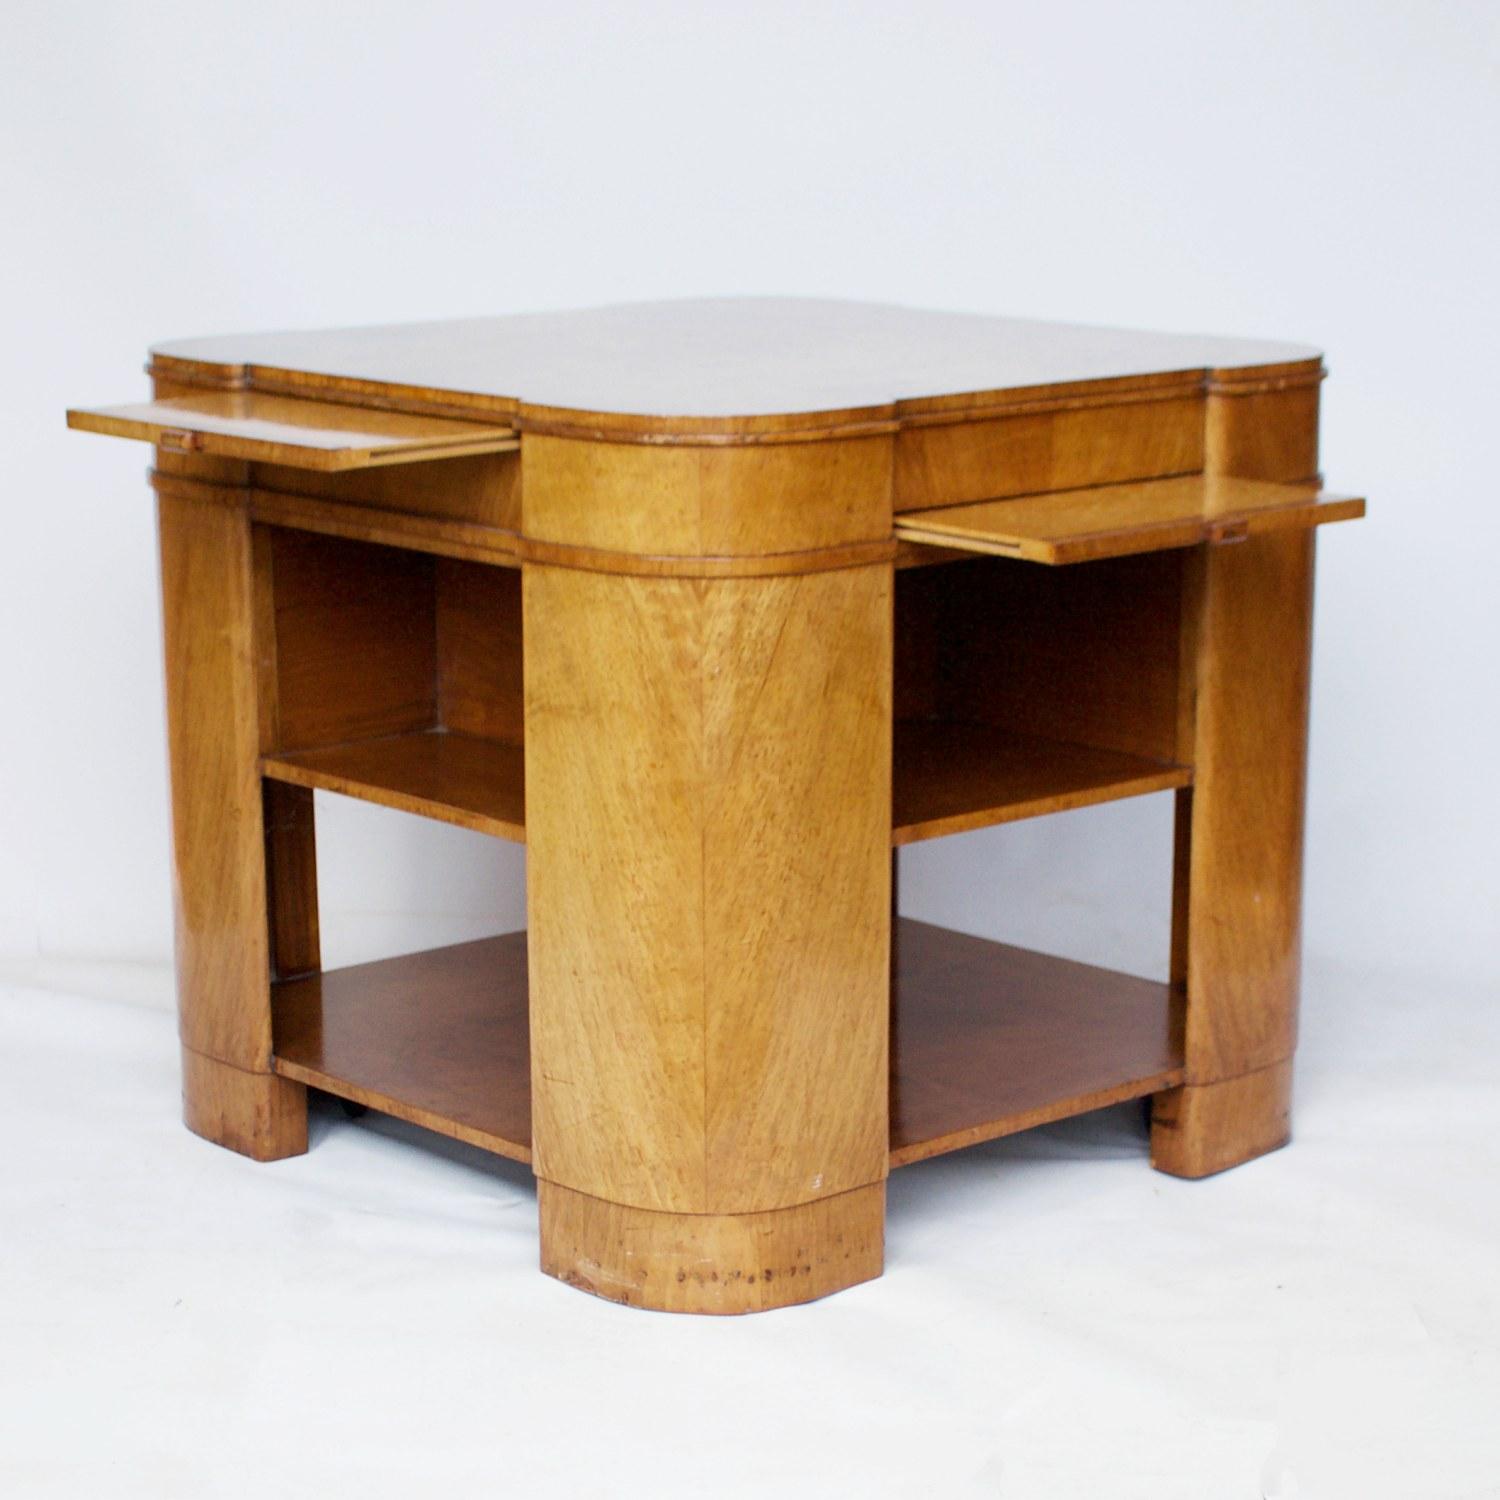 An Art Deco library table. Burr walnut veneered throughout with four pullout / pull-out bird's-eye maple veneered shelves. 

Dimensions: H 62cm, W/D 69cm 

Origin: English

Date: circa 1930

Item number: 801211

All of our furniture is